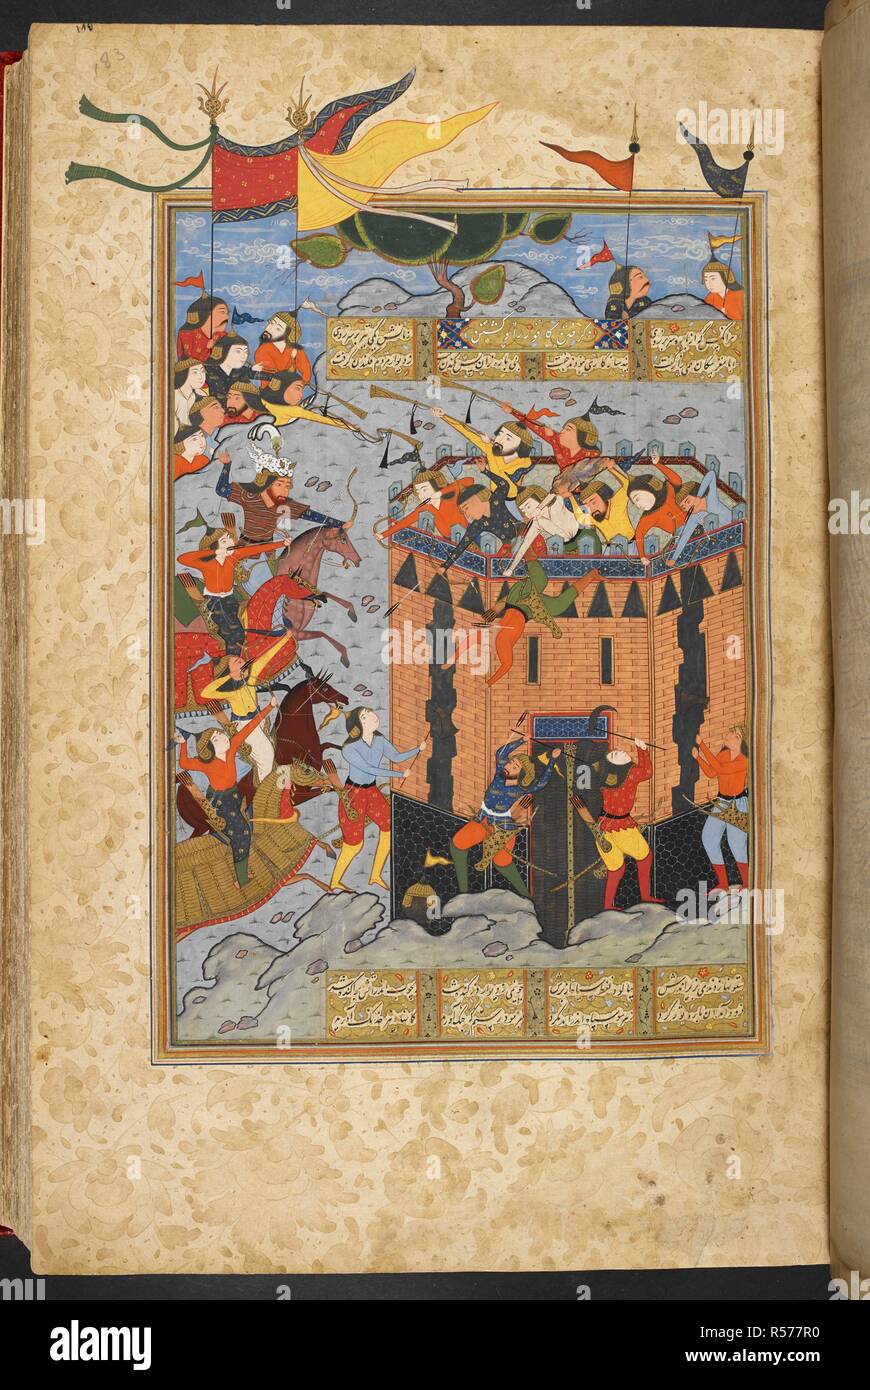 Rustam attacking the fortress of Kafur the man-eater. Shahnama of Firdawsi, with 56 miniatures. 1580 - 1600. Source: I.O. ISLAMIC 3540, f.183. Language: Persian. Stock Photo